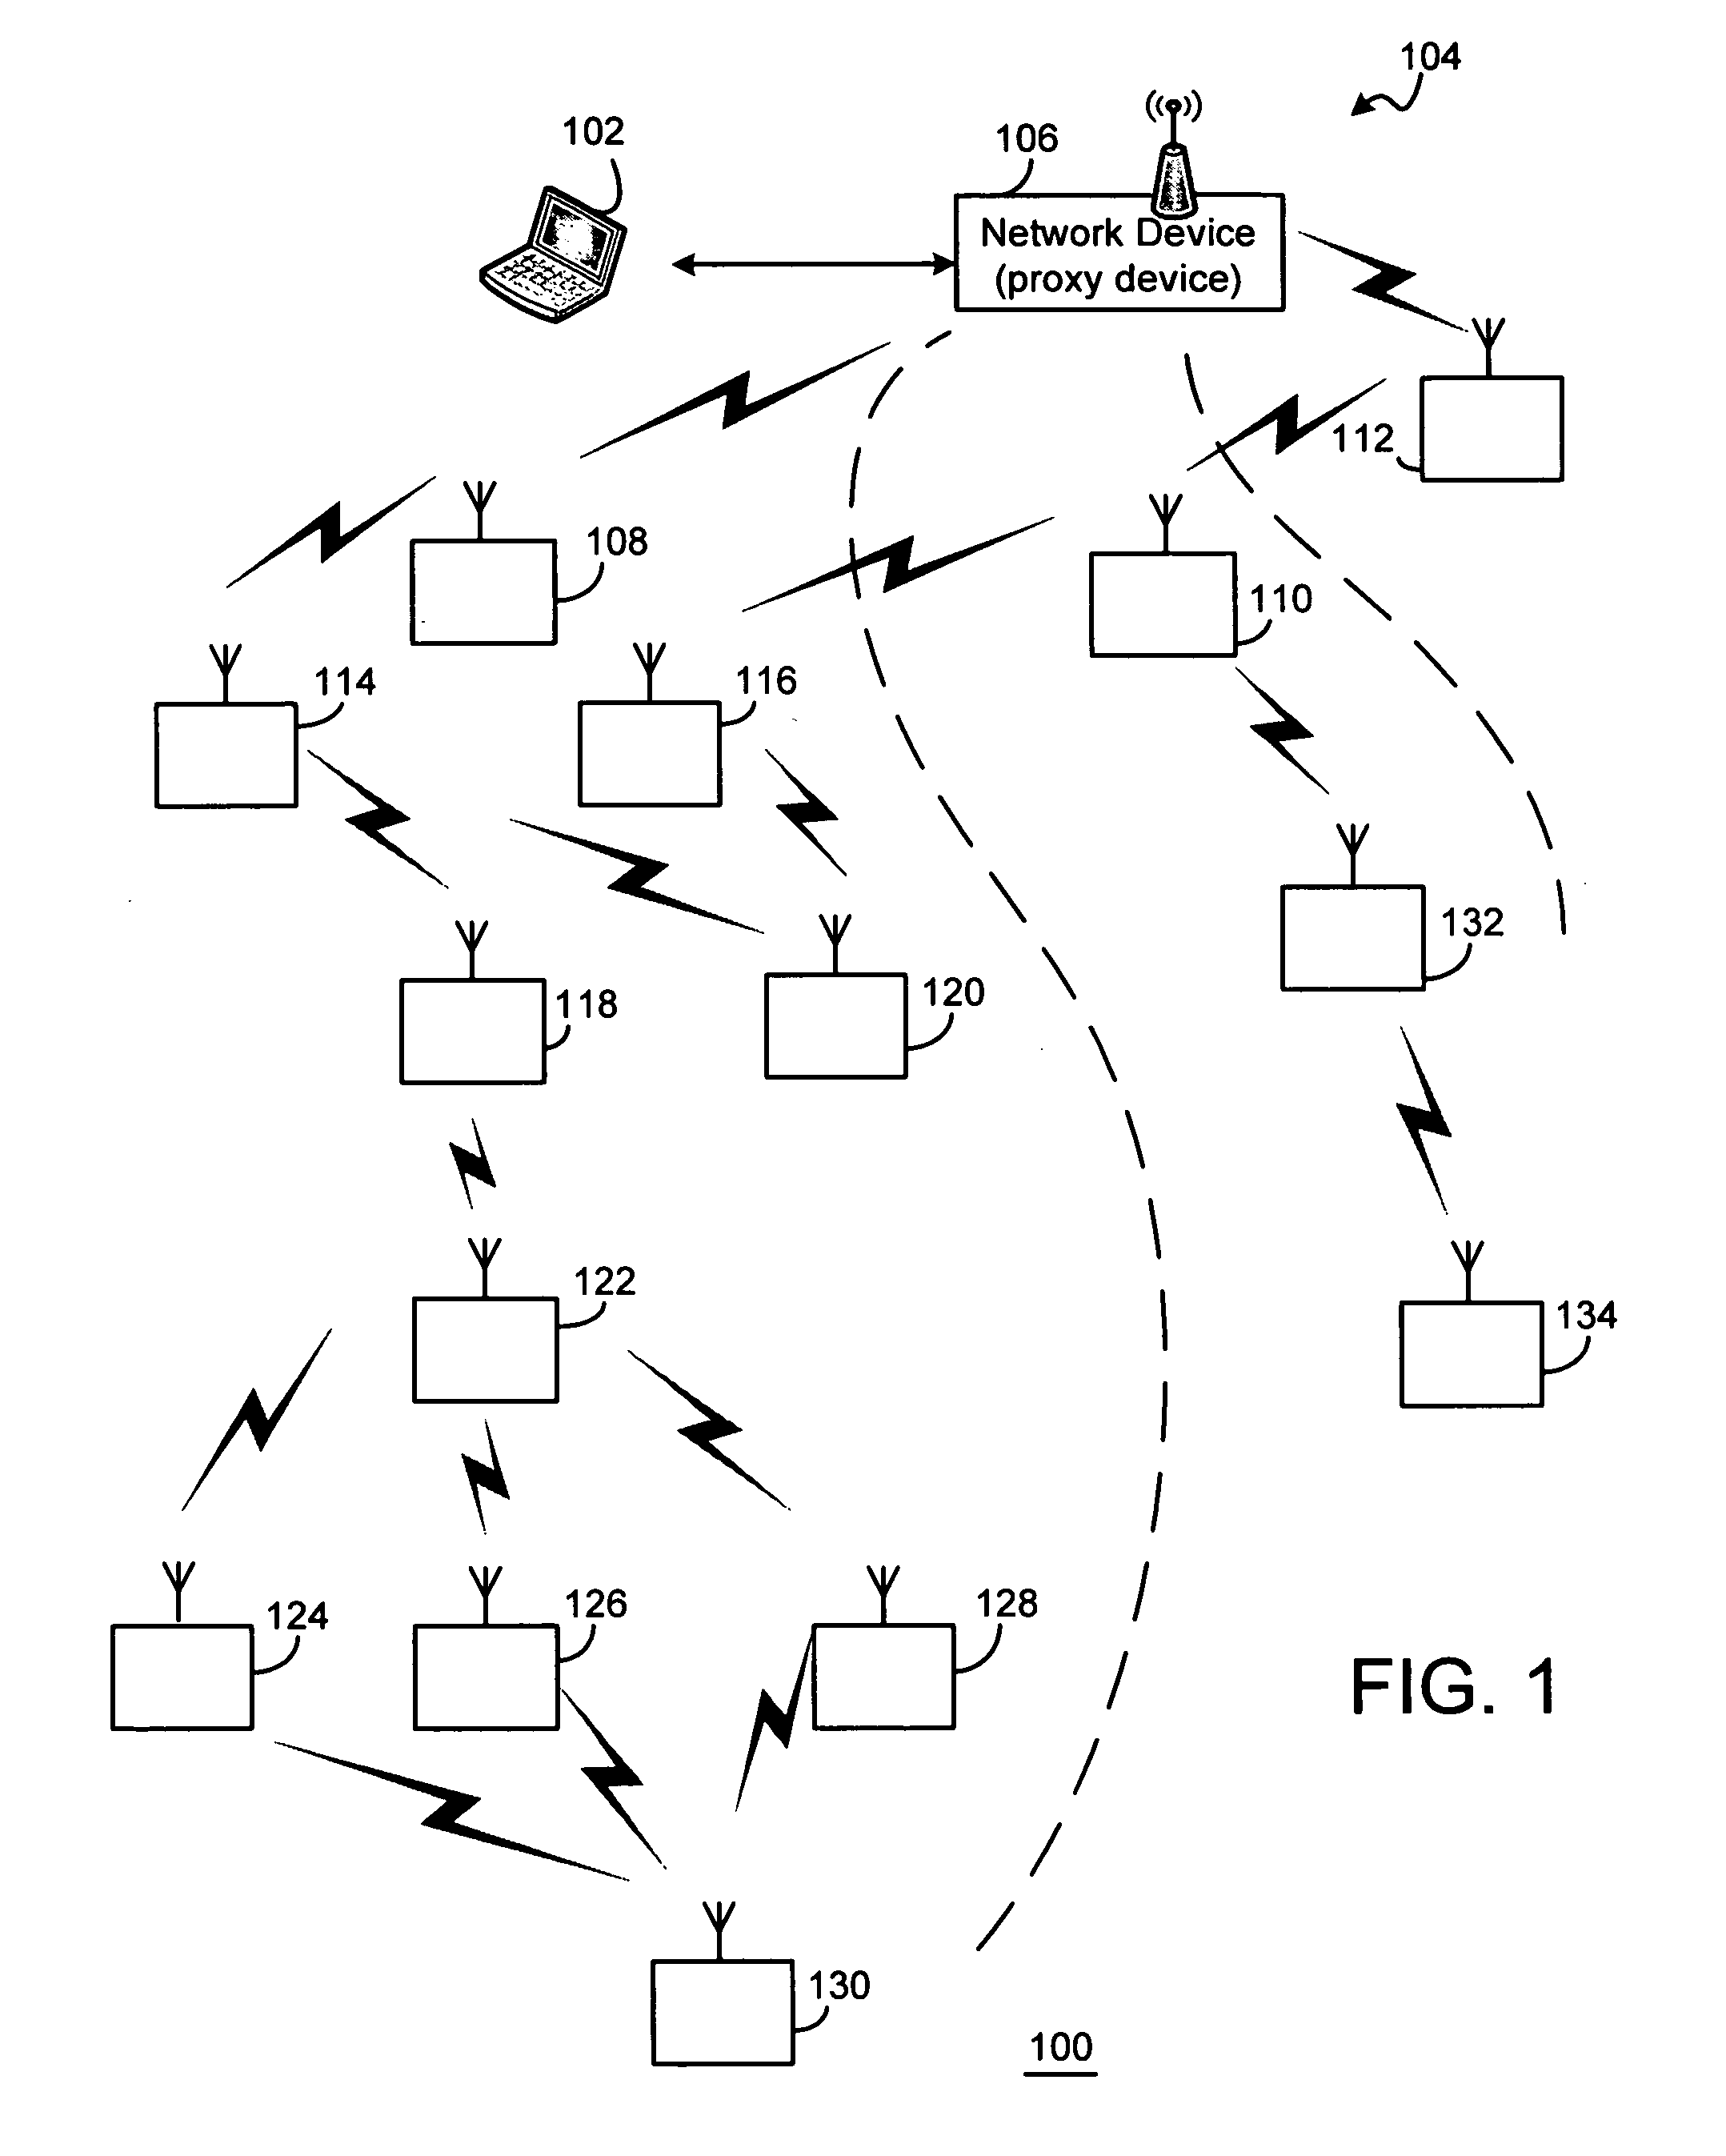 Over-the-air download (OAD) methods and apparatus for use in facilitating application programming in wireless network devices of ad hoc wireless communication networks